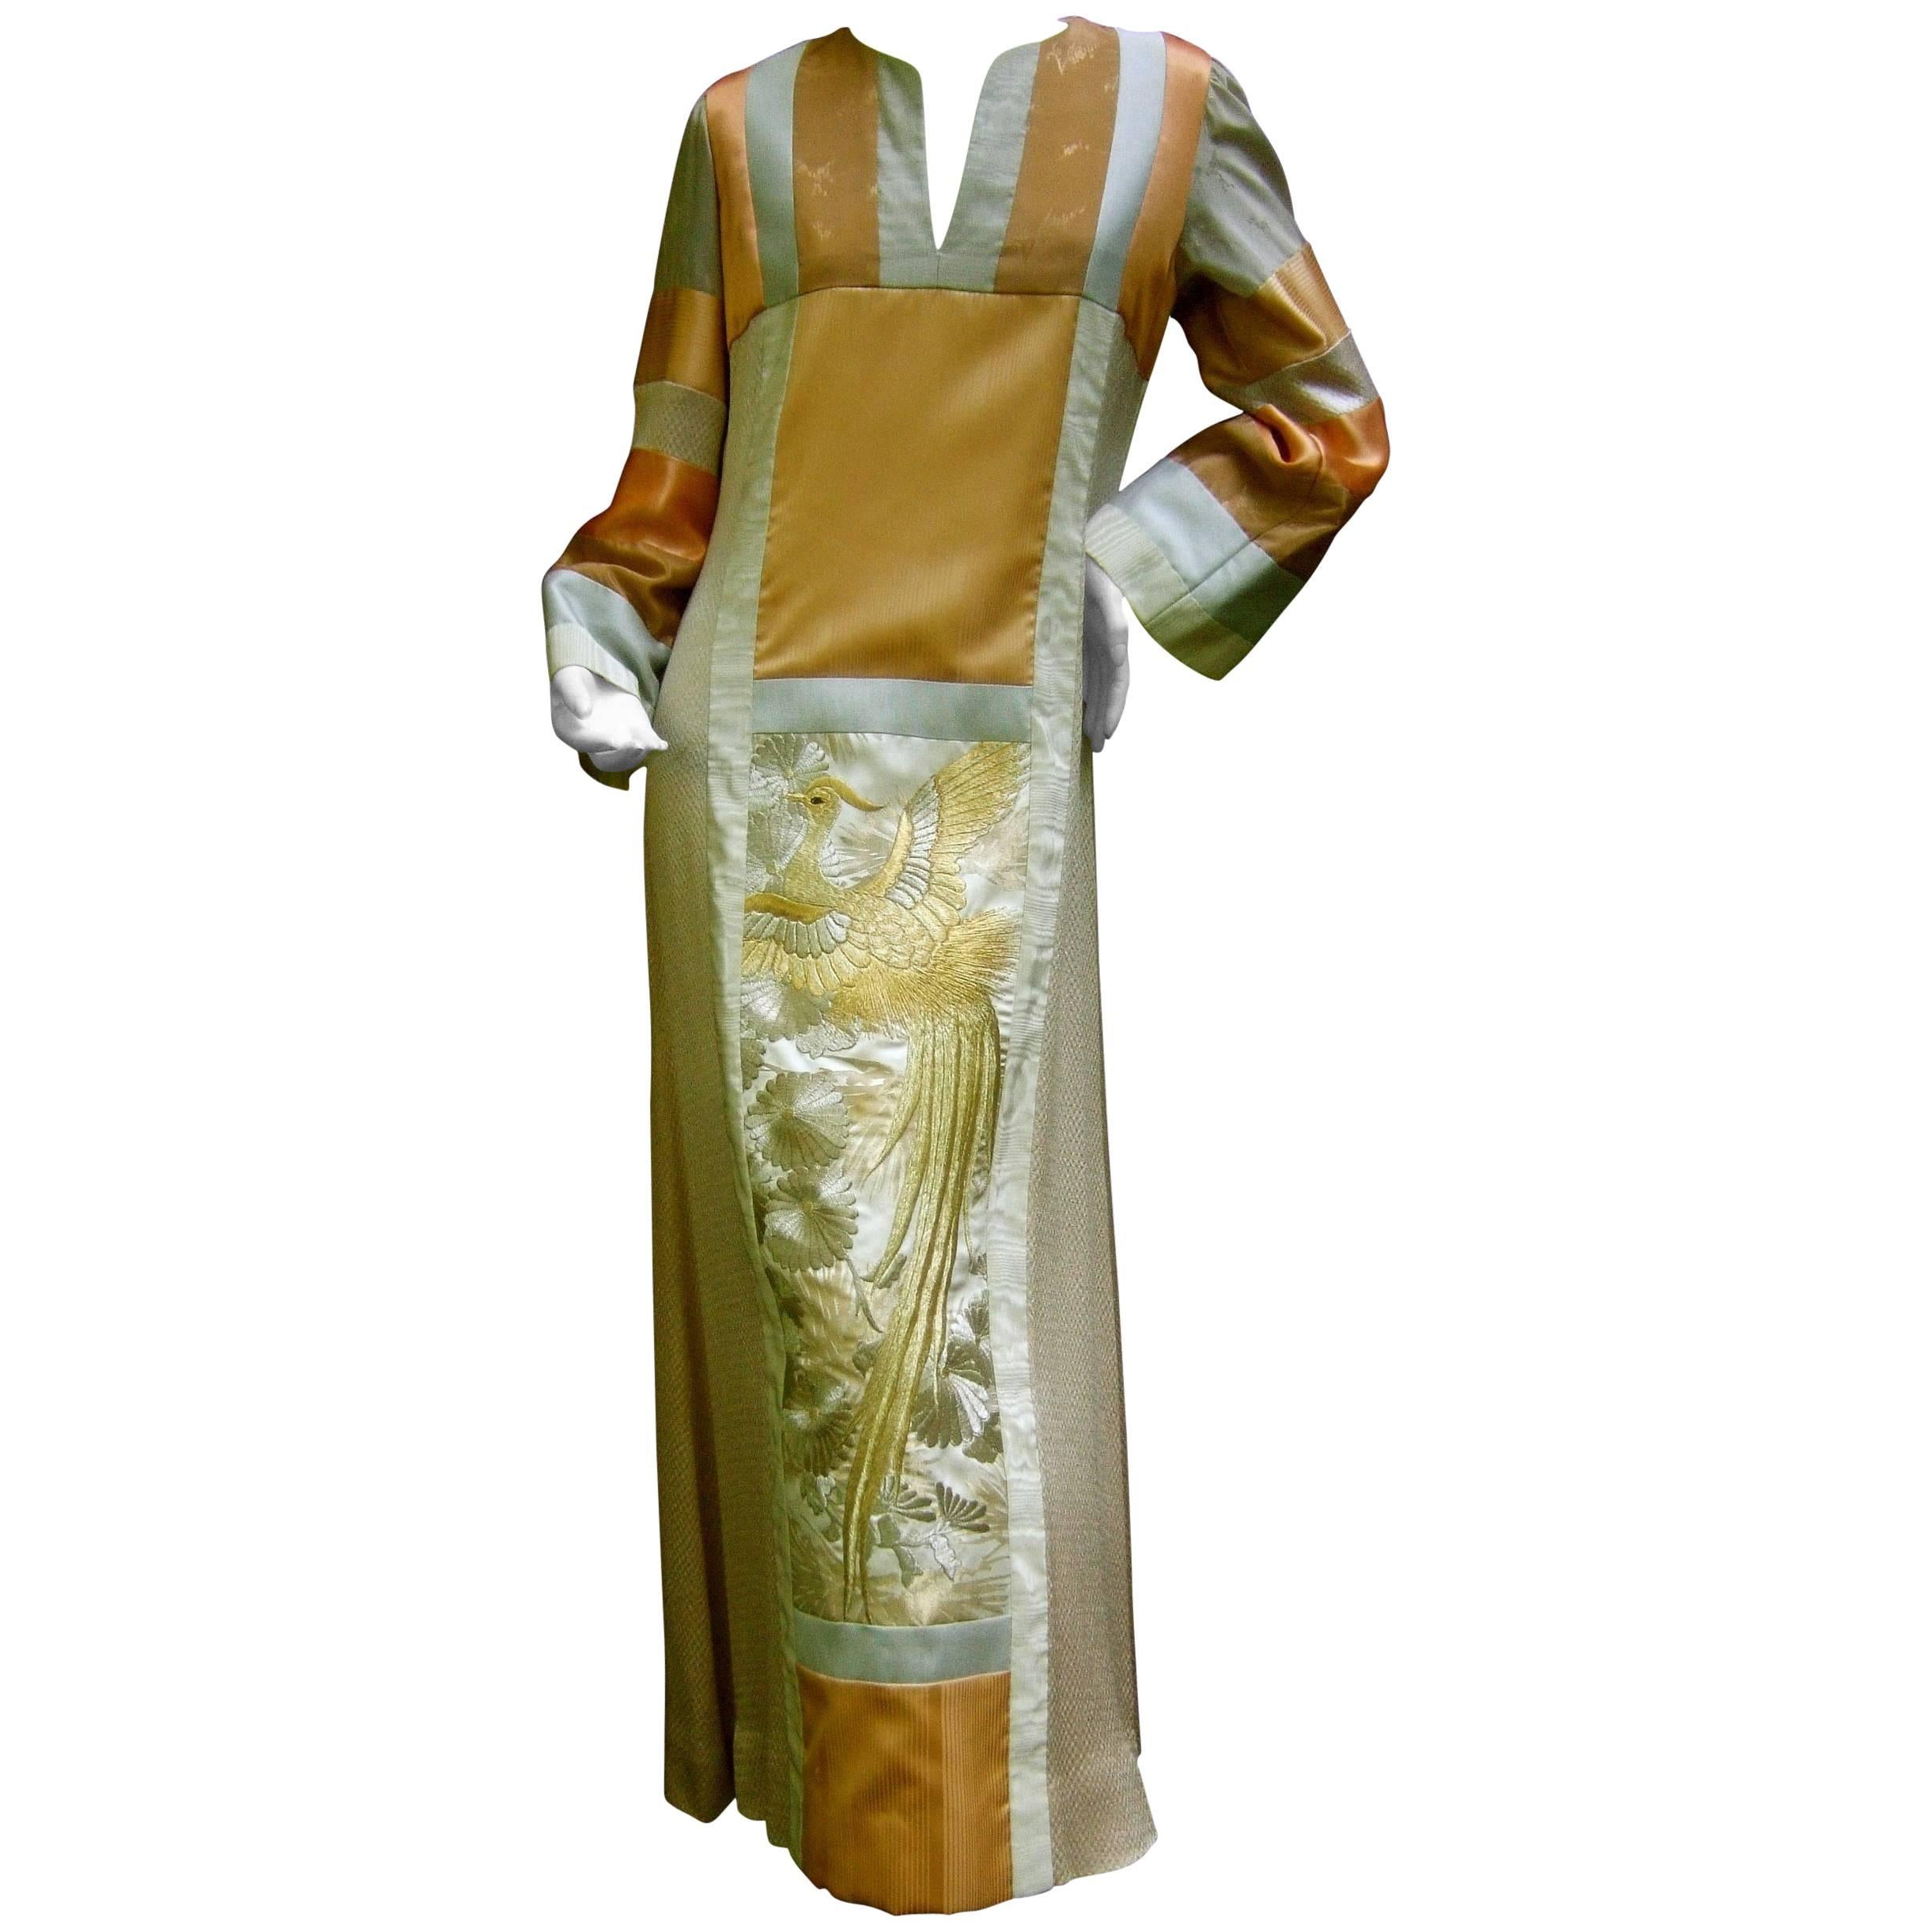 Stunning Rare Japanese Style Caftan Gown by Jon Shannon c 1970s